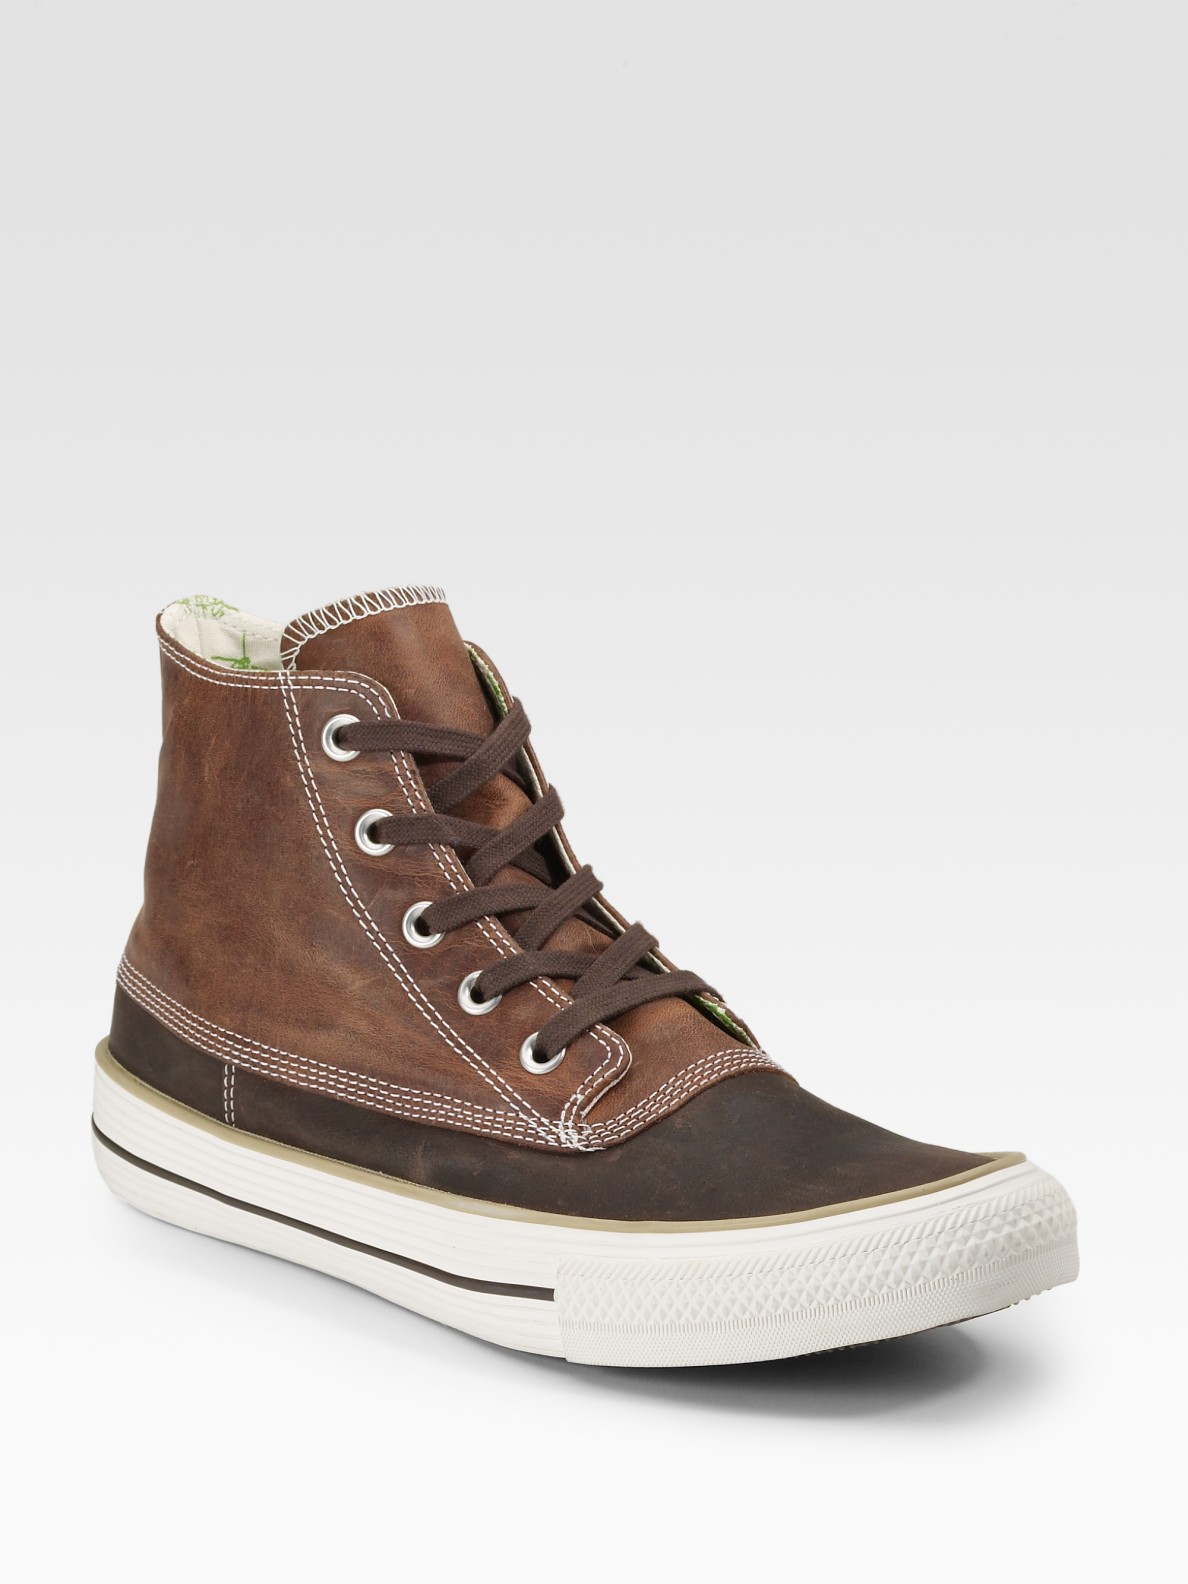 Converse Chuck Taylor Leather Duck Ankle Boots in Chocolate (Brown) for Men  - Lyst